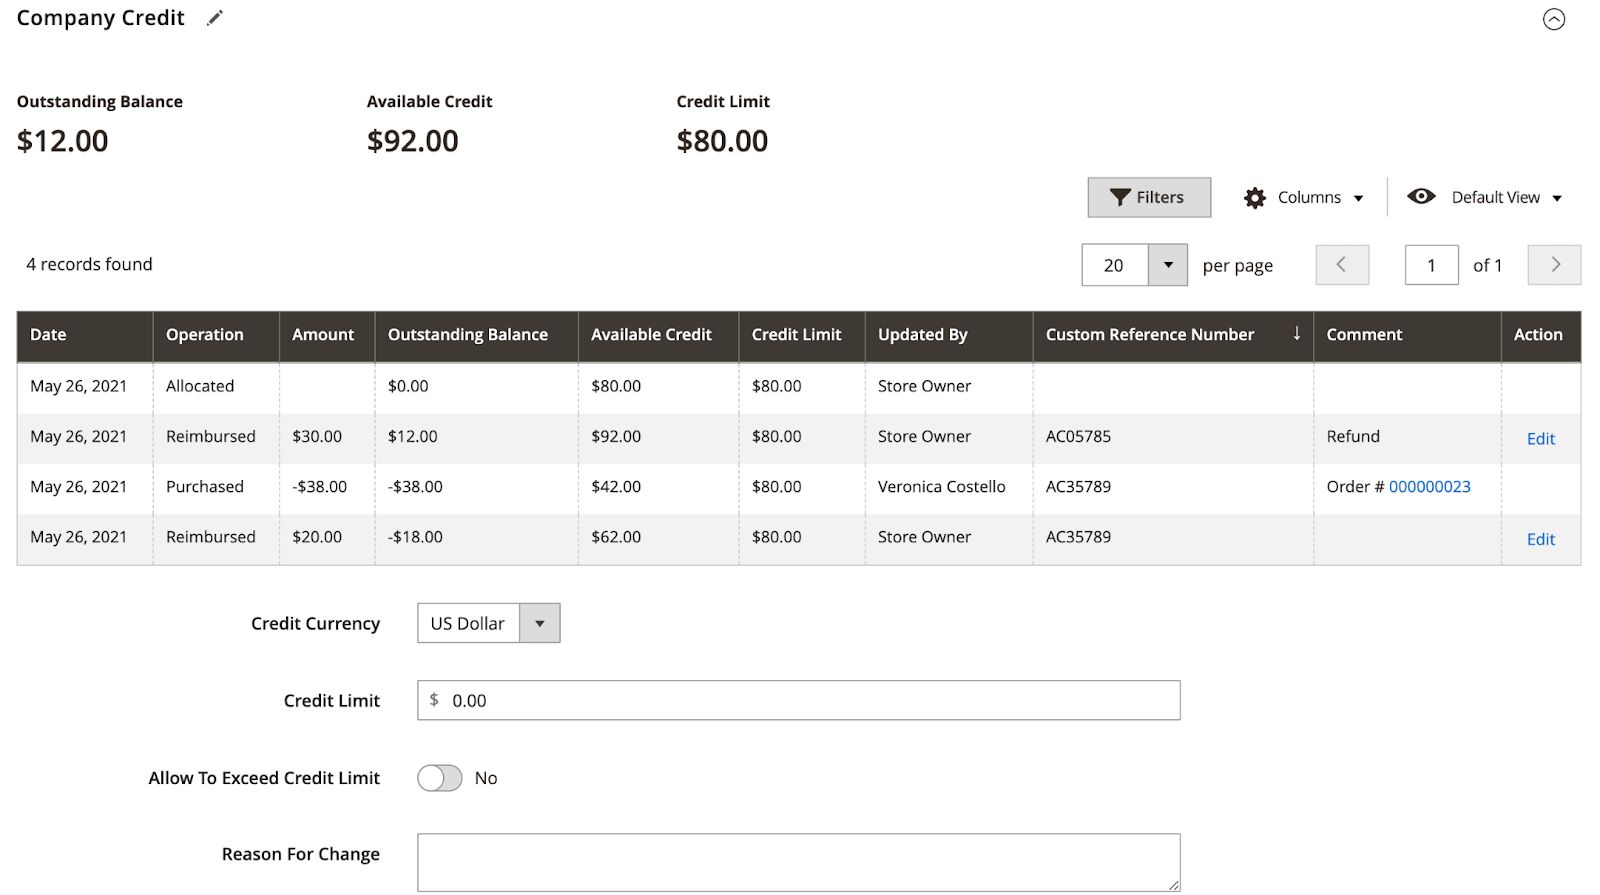 Magento Commerce has a dashboard for company credit management.